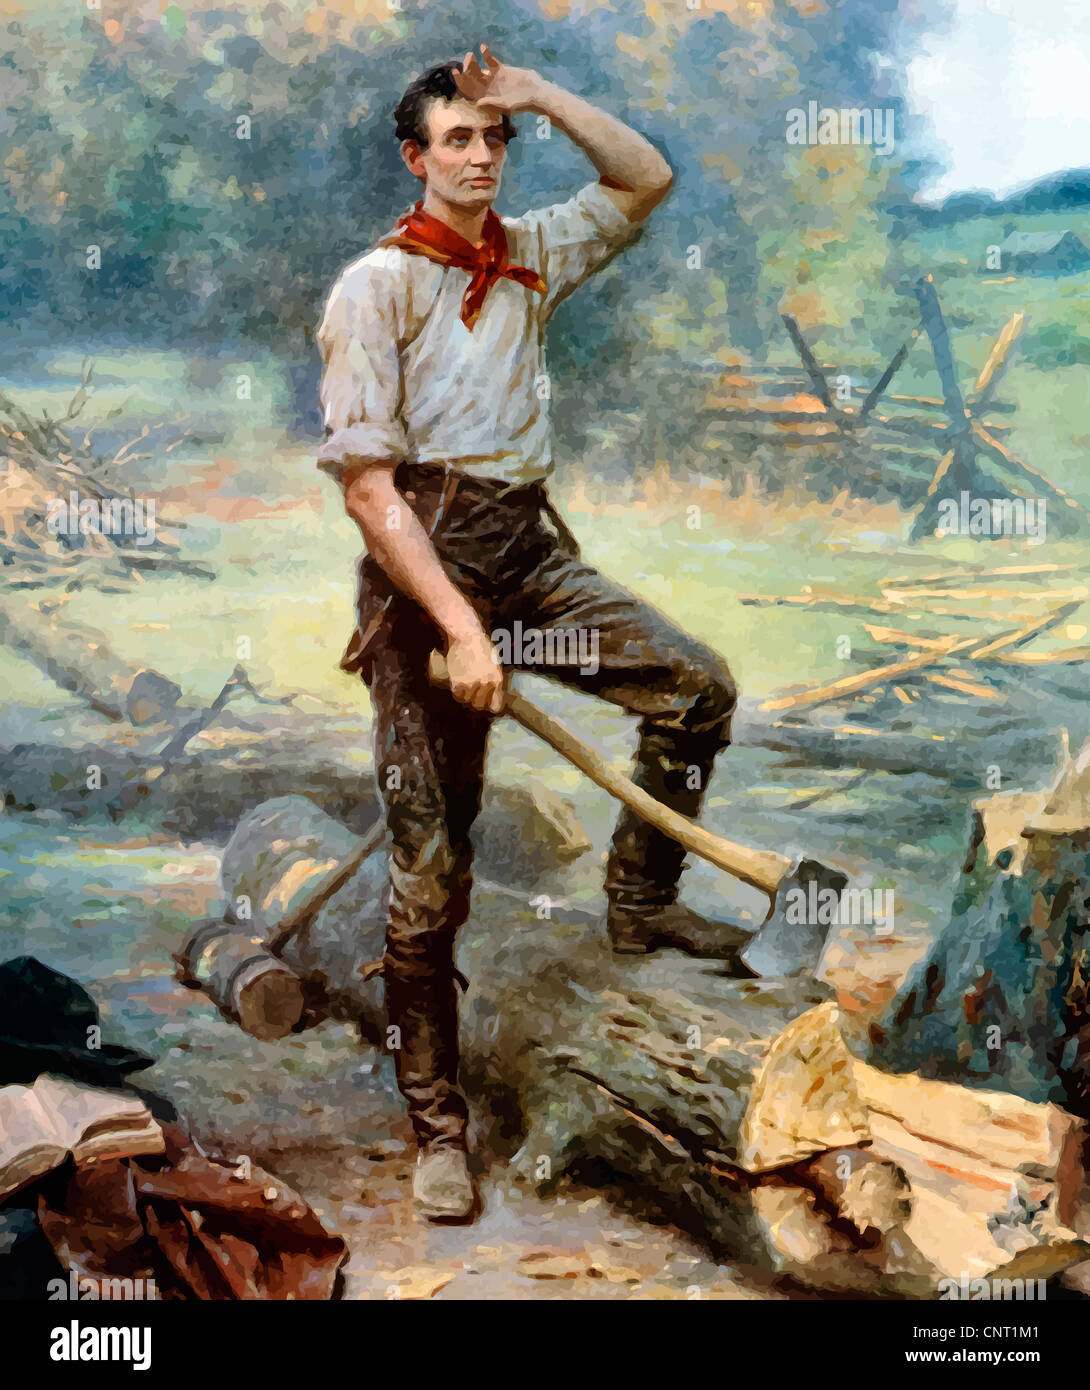 Digitally restored vector painting of a young Abraham Lincoln, The Rail Splitter, chopping wood. Stock Photo